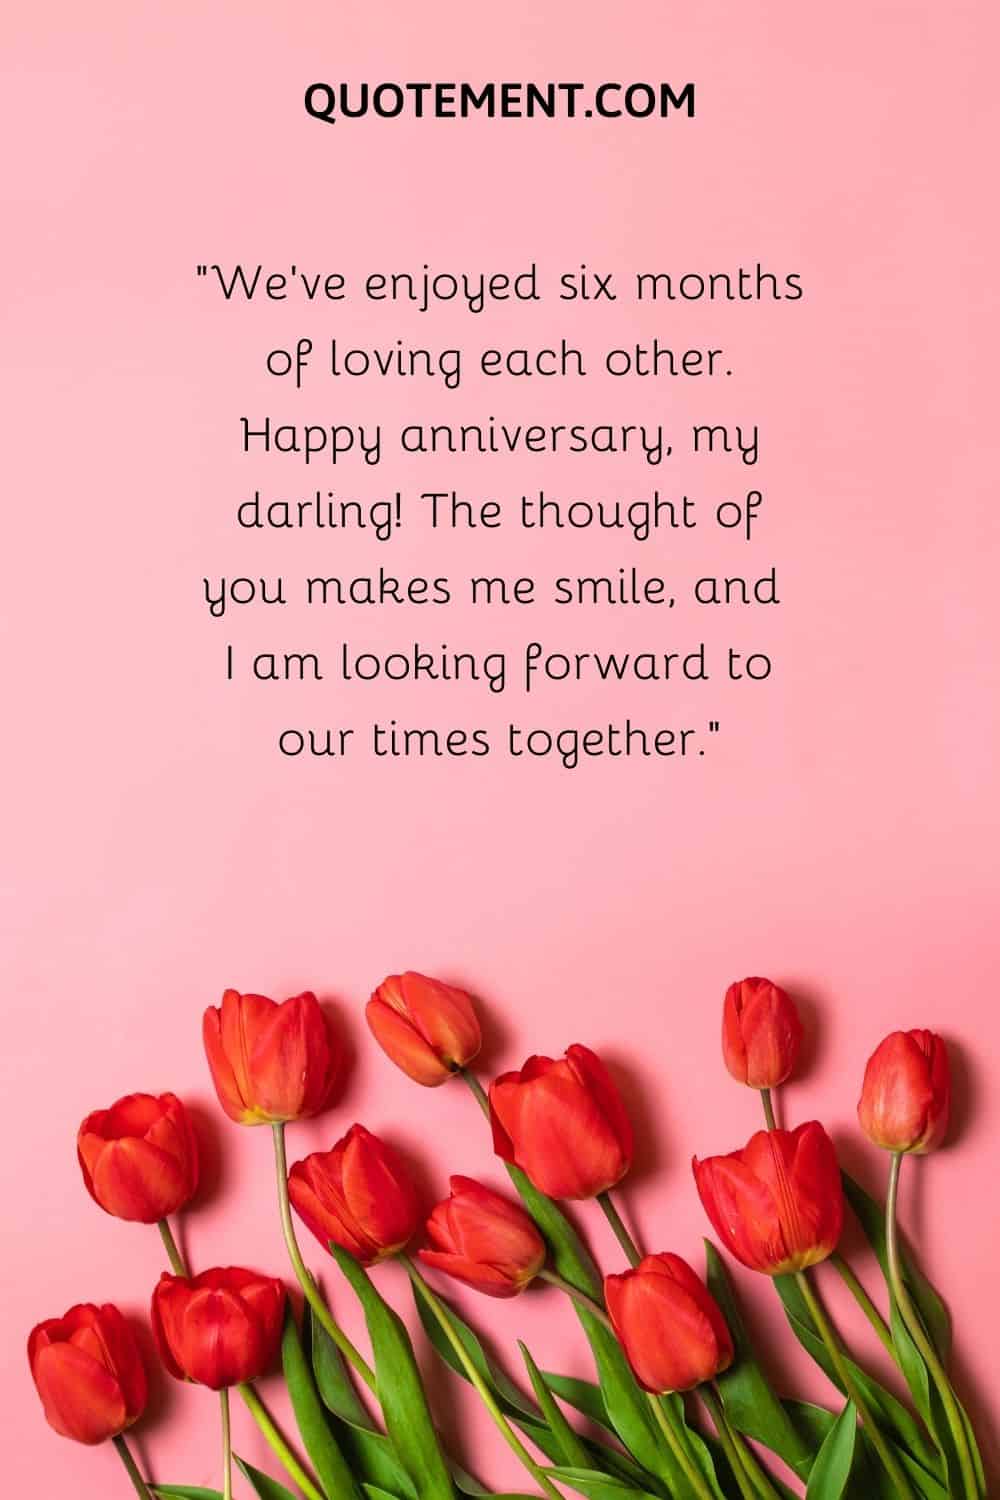 150 Cute Happy 6 Month Anniversary Wishes & Messages